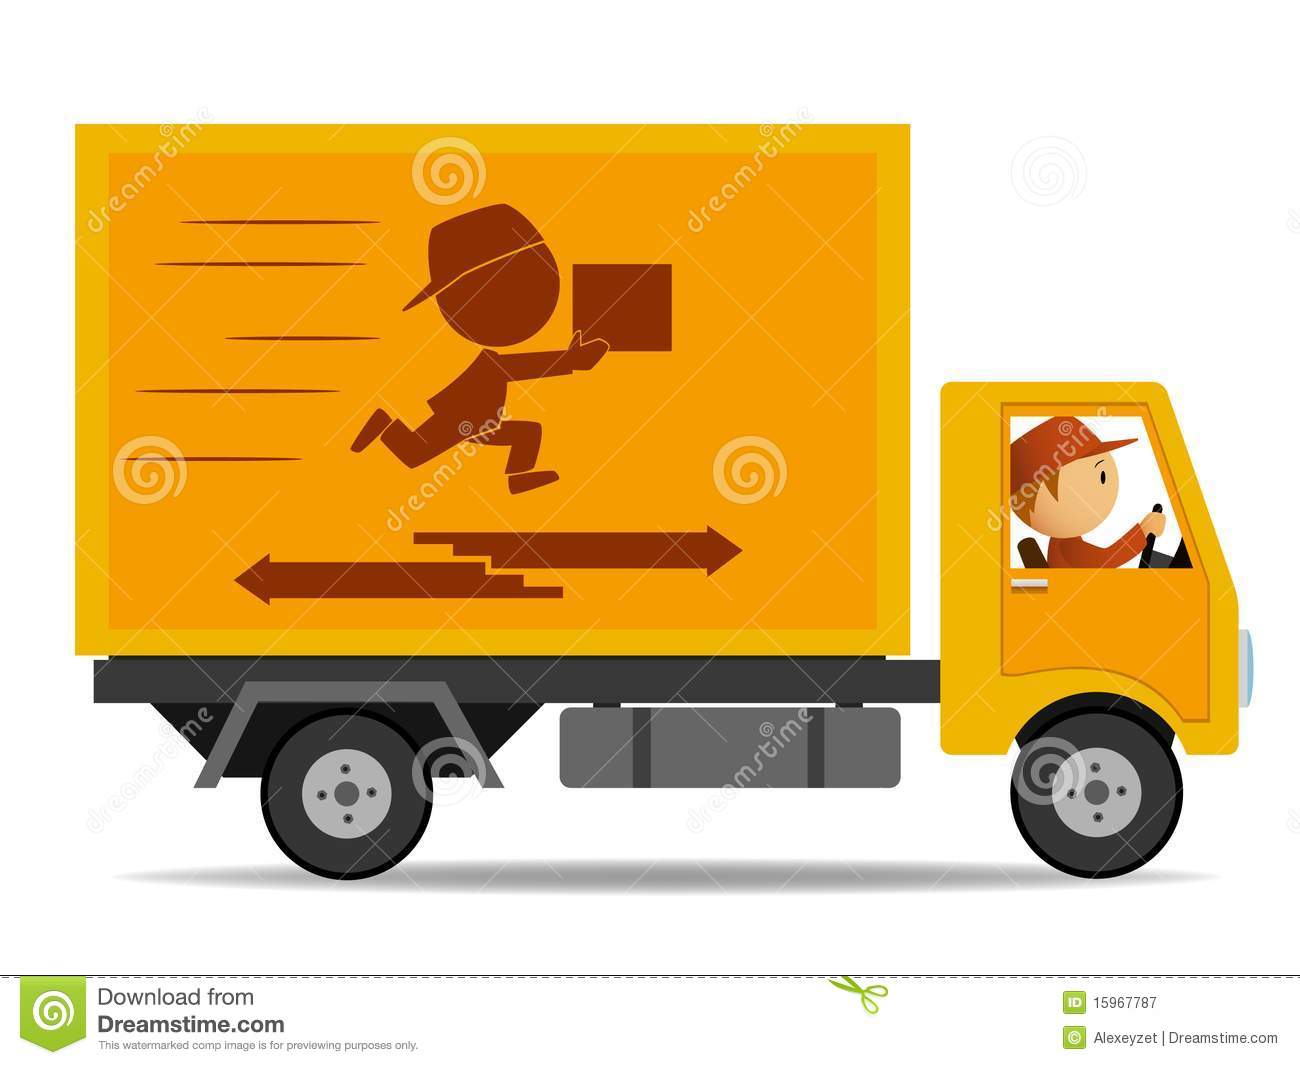 Truck Delivery With Driver Royalty Free Stock Photography   Image    